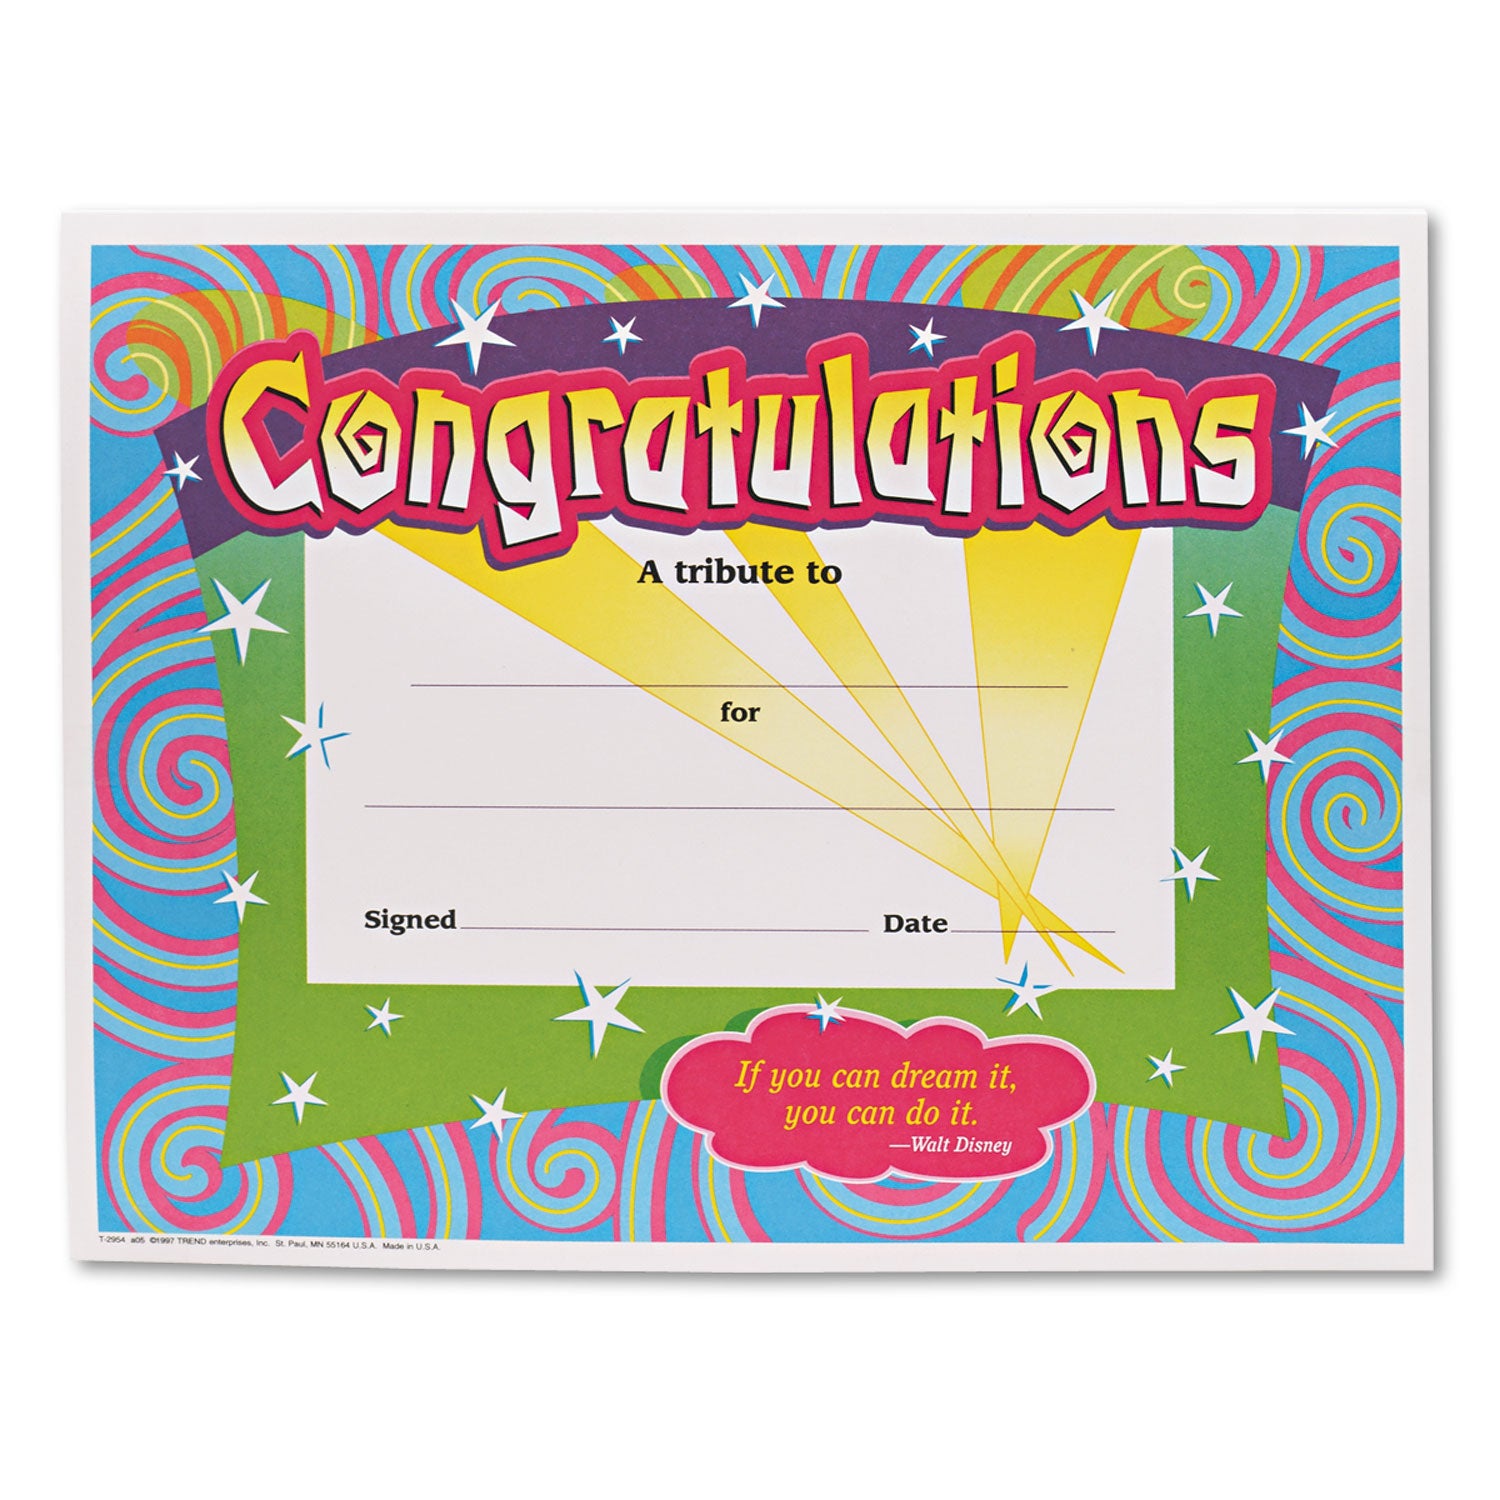 Congratulations Colorful Classic Certificates, 11 x 8.5, Horizontal Orientation, Assorted Colors with White Border, 30/Pack - 